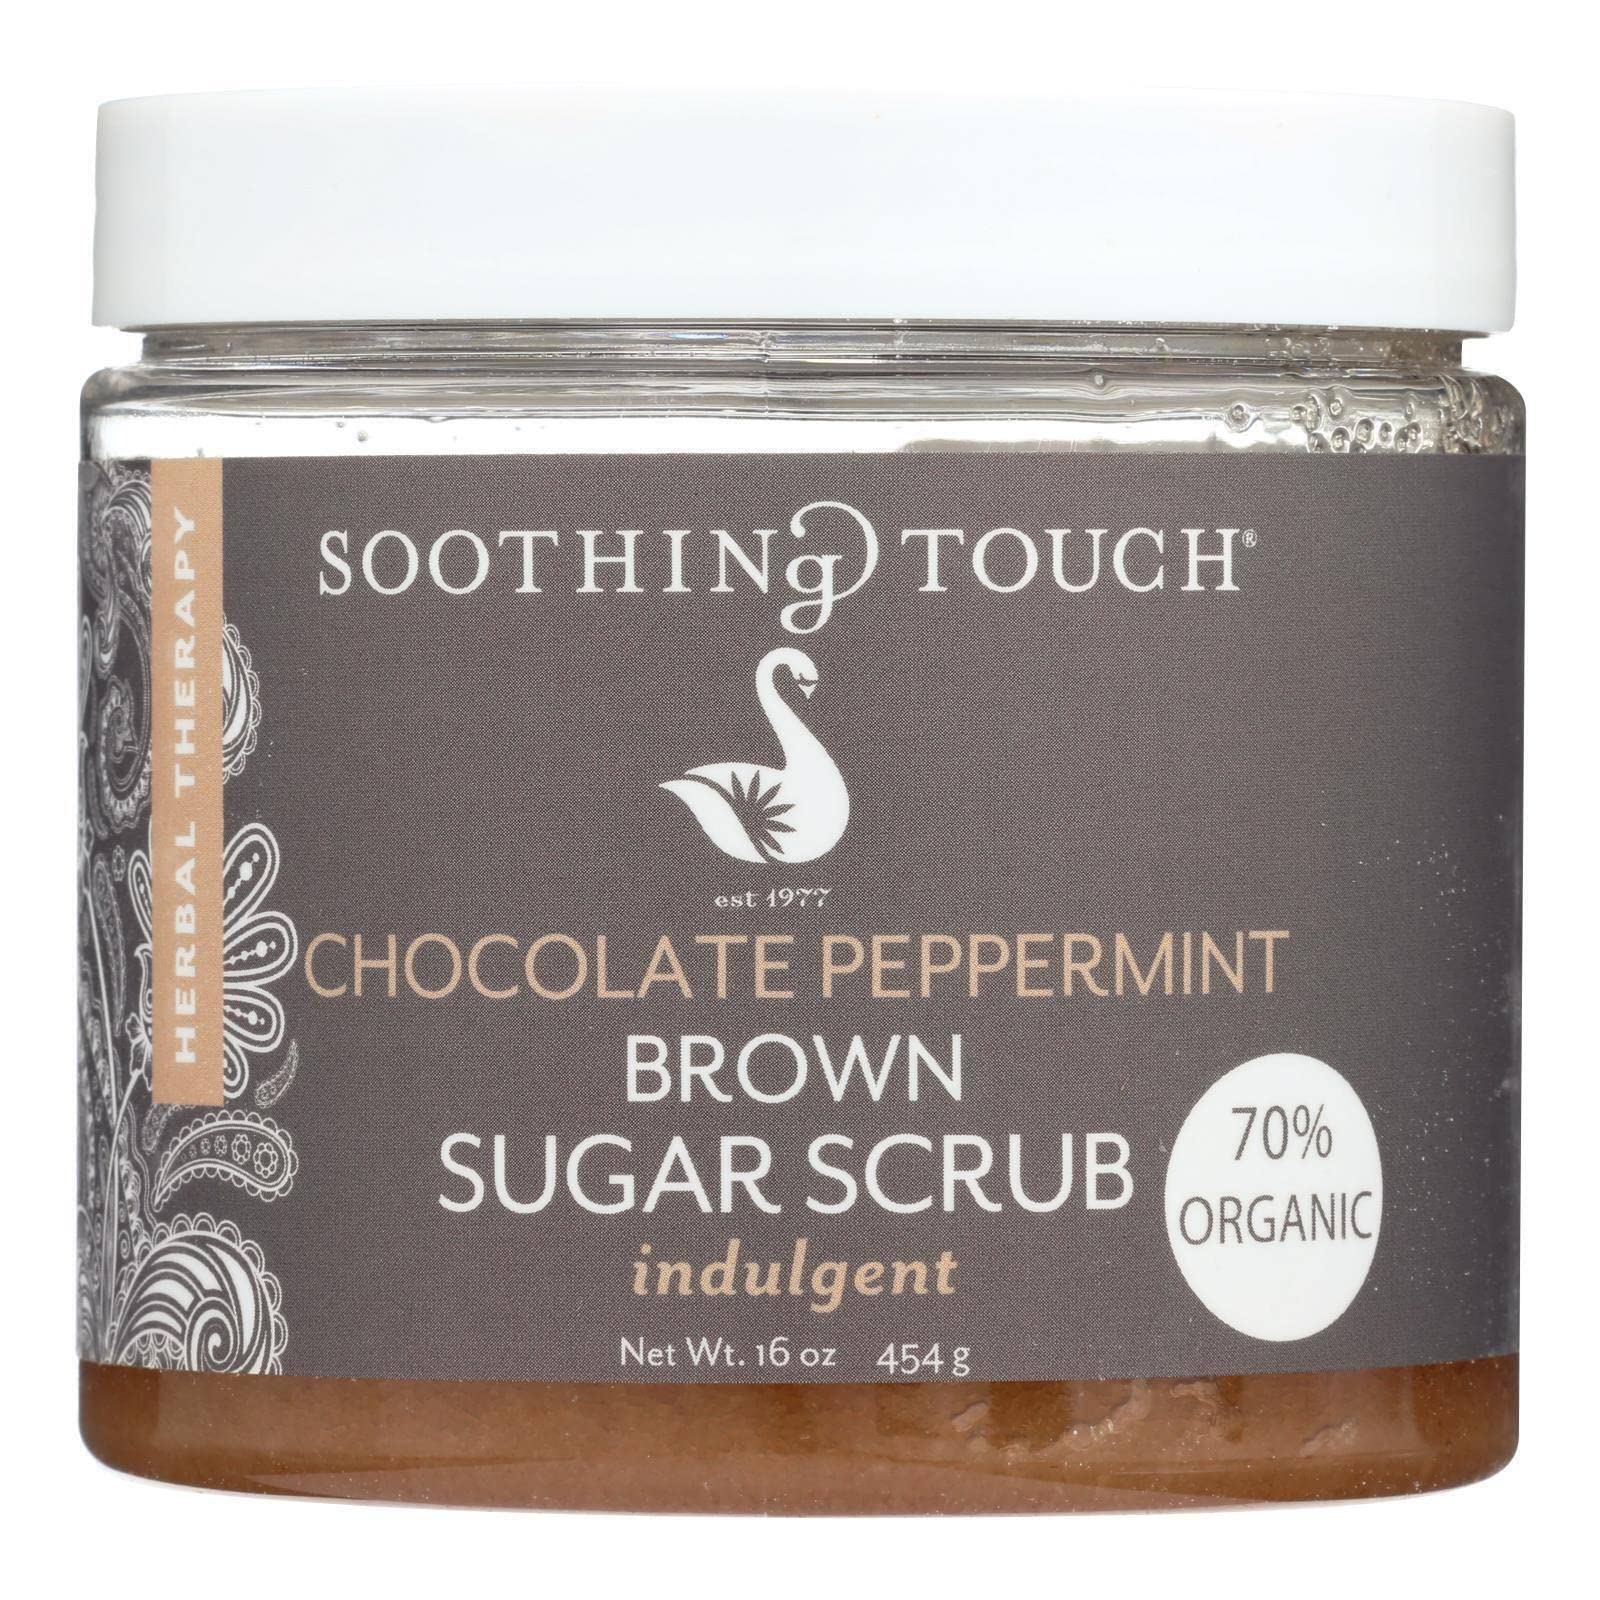 Soothing Touch Brown Sugar Scrub, Chocolate Peppermint - 16 Oz